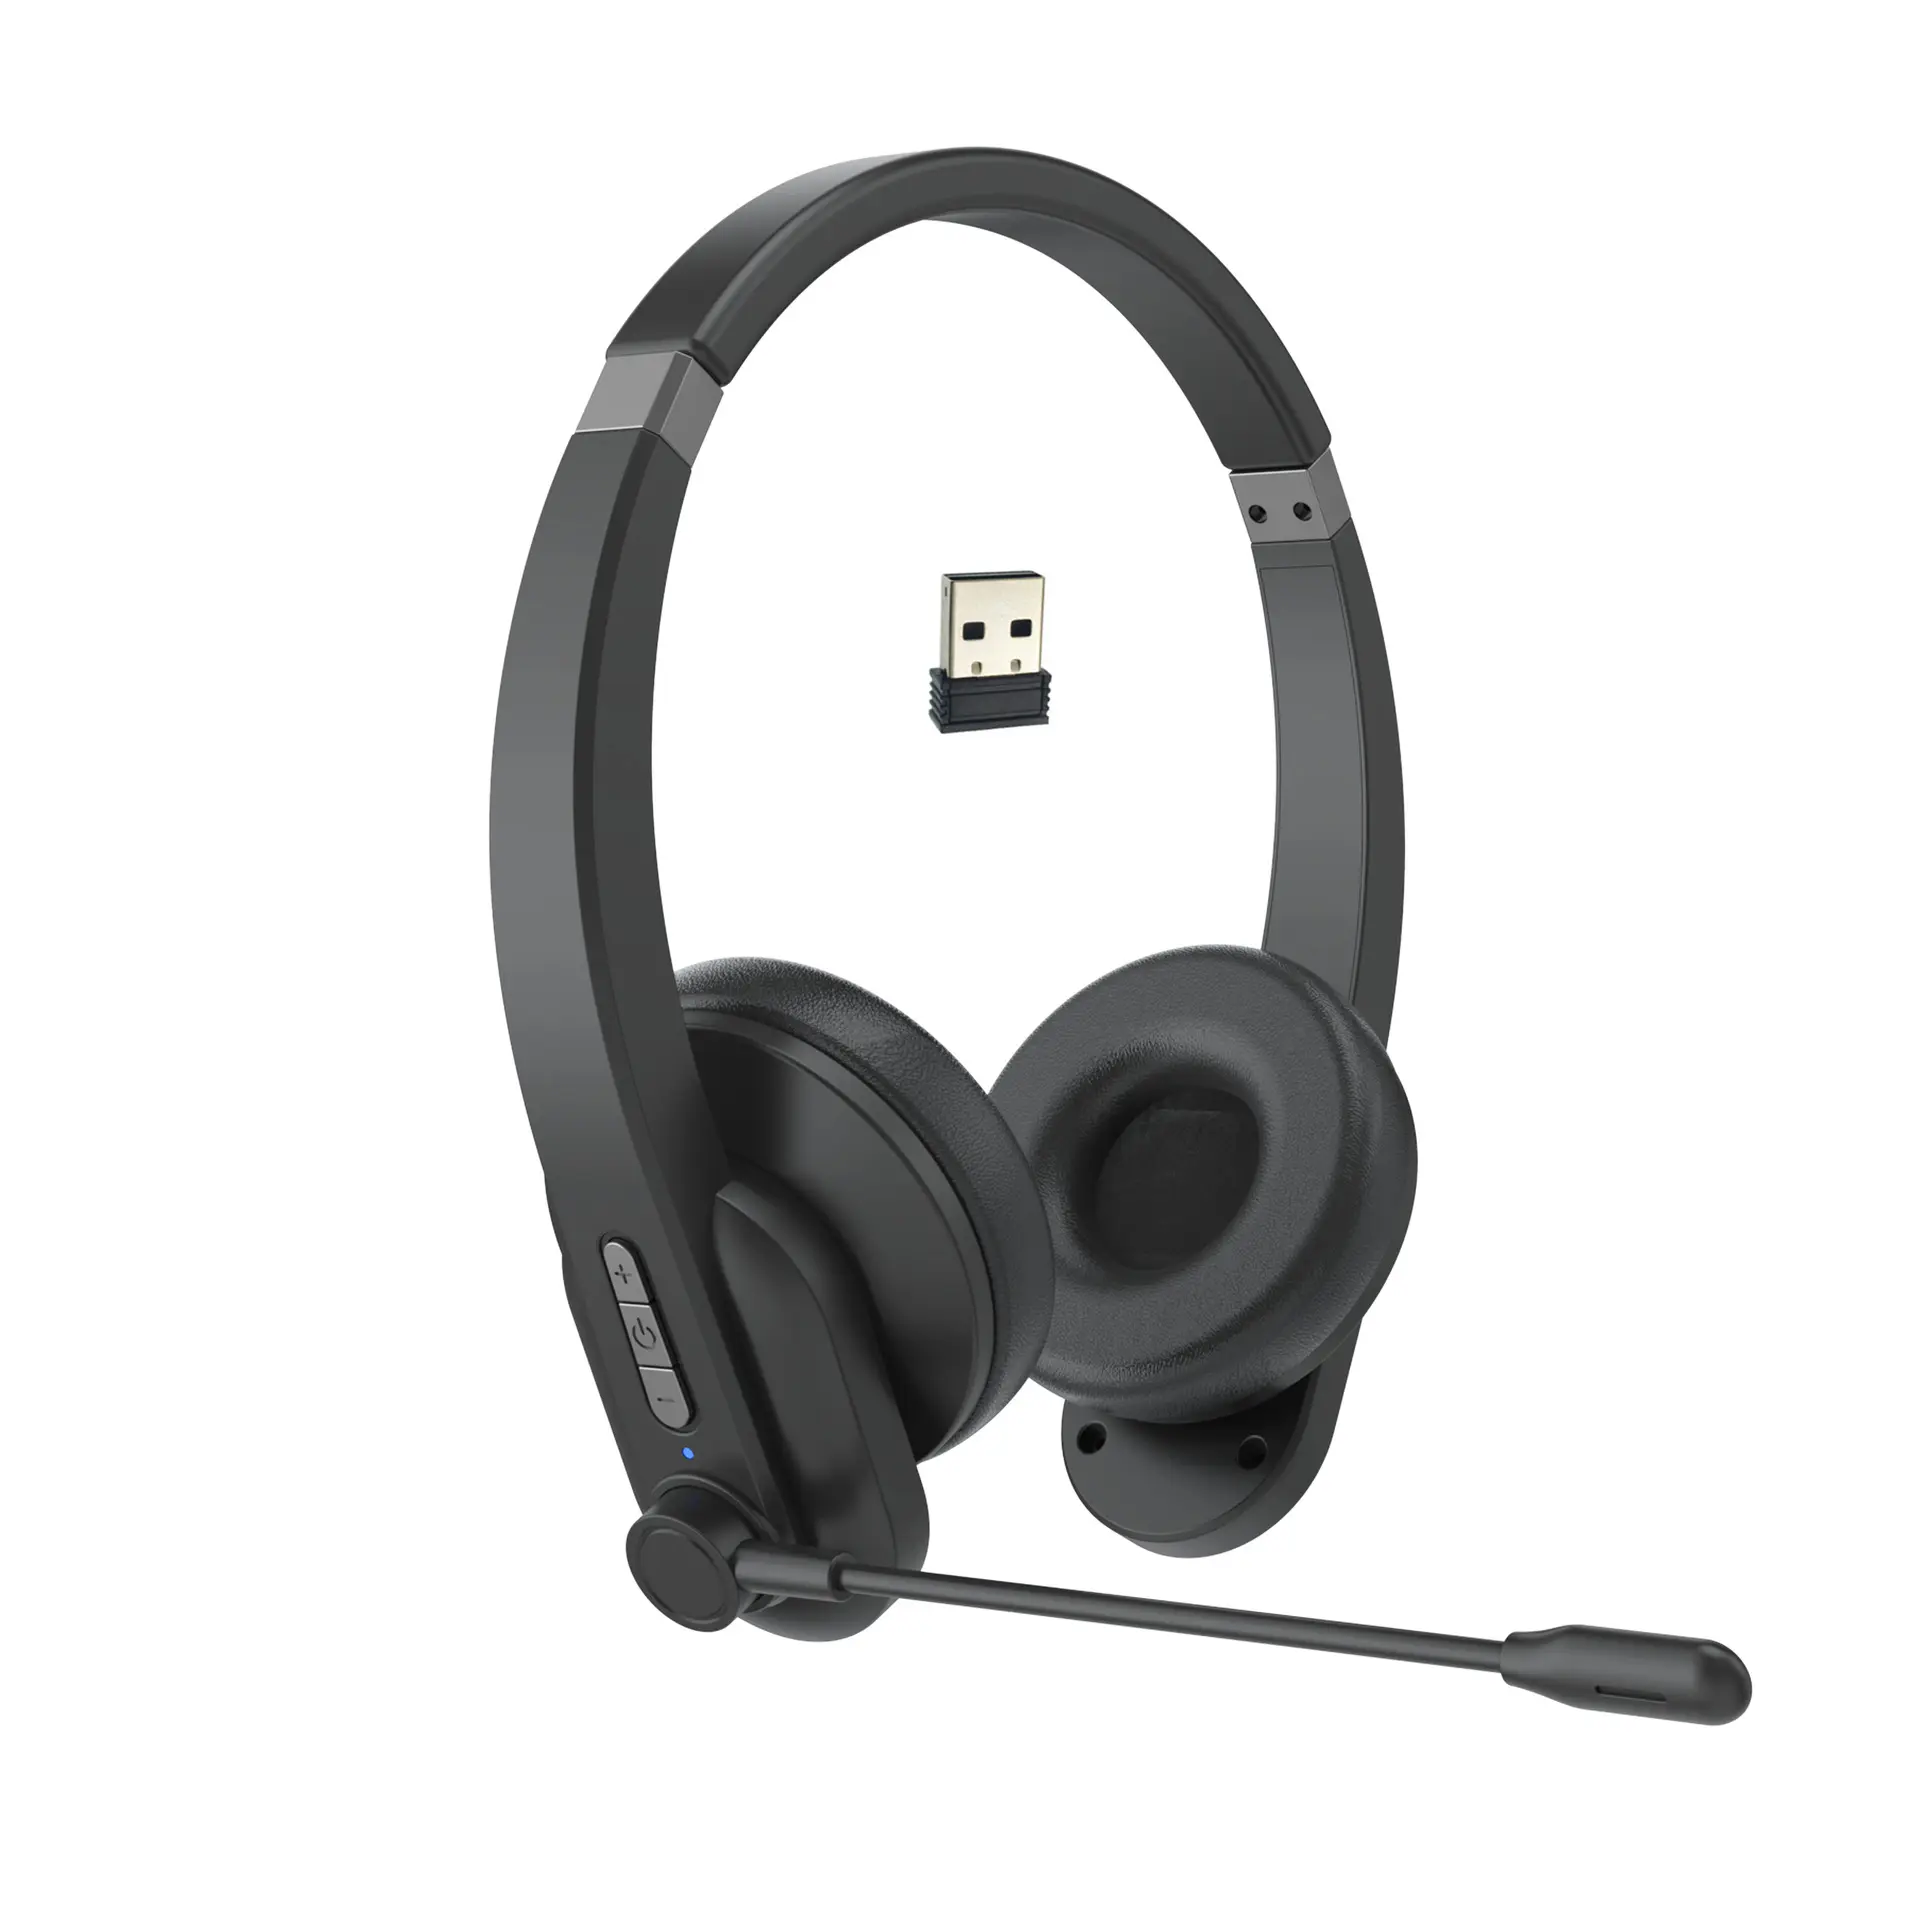 2.4G Wireless Telephone Headset audifonos ENC Noise cancelling Call Center Headphones Office Headset with Microphone